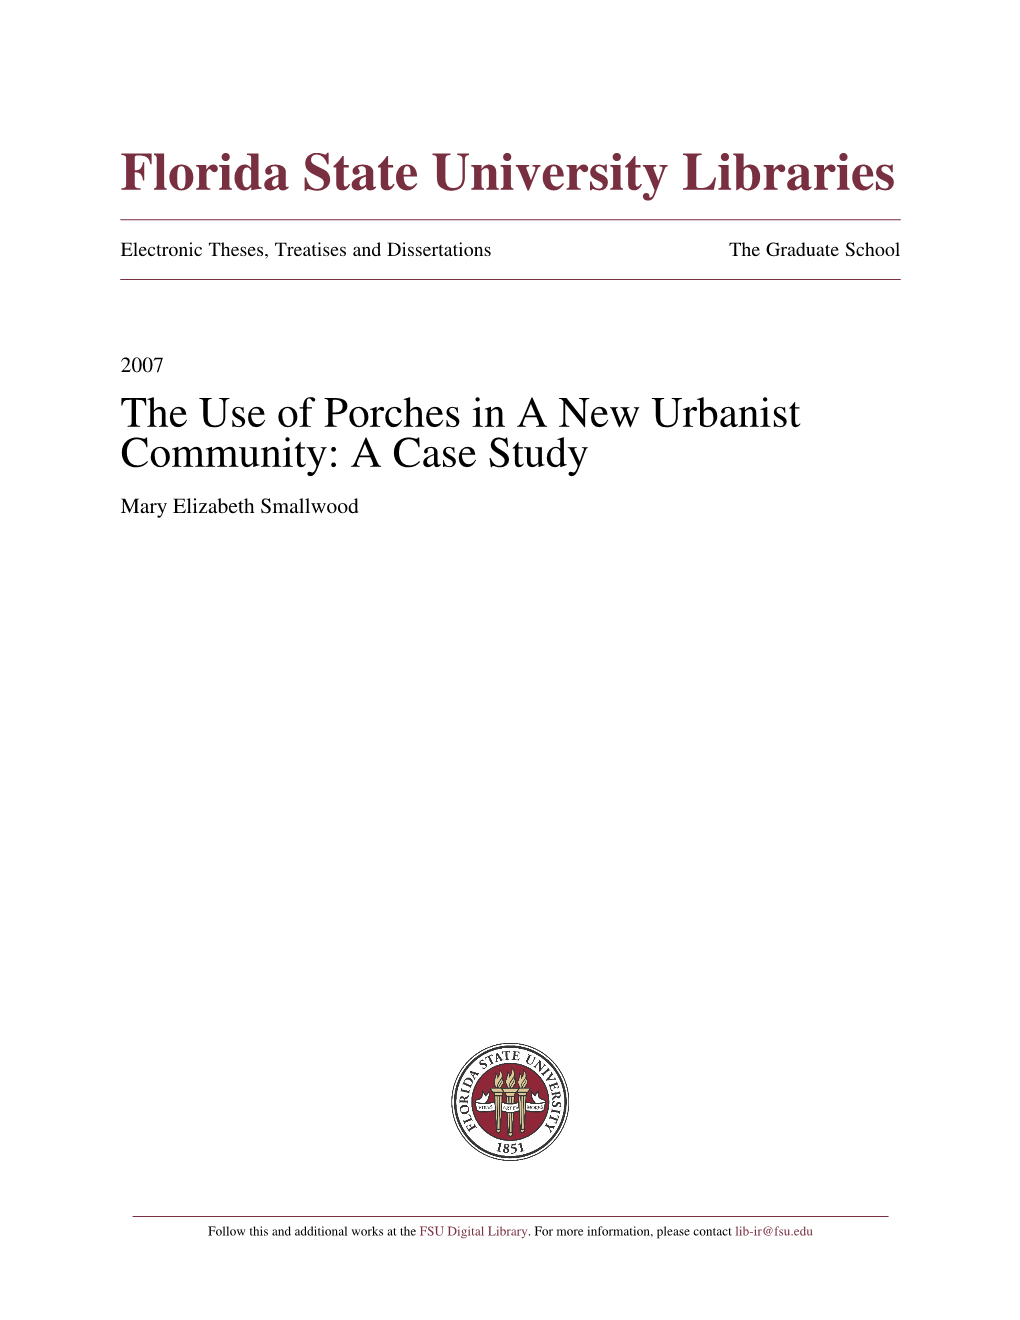 The Use of Porches in a New Urbanist Community: a Case Study Mary Elizabeth Smallwood